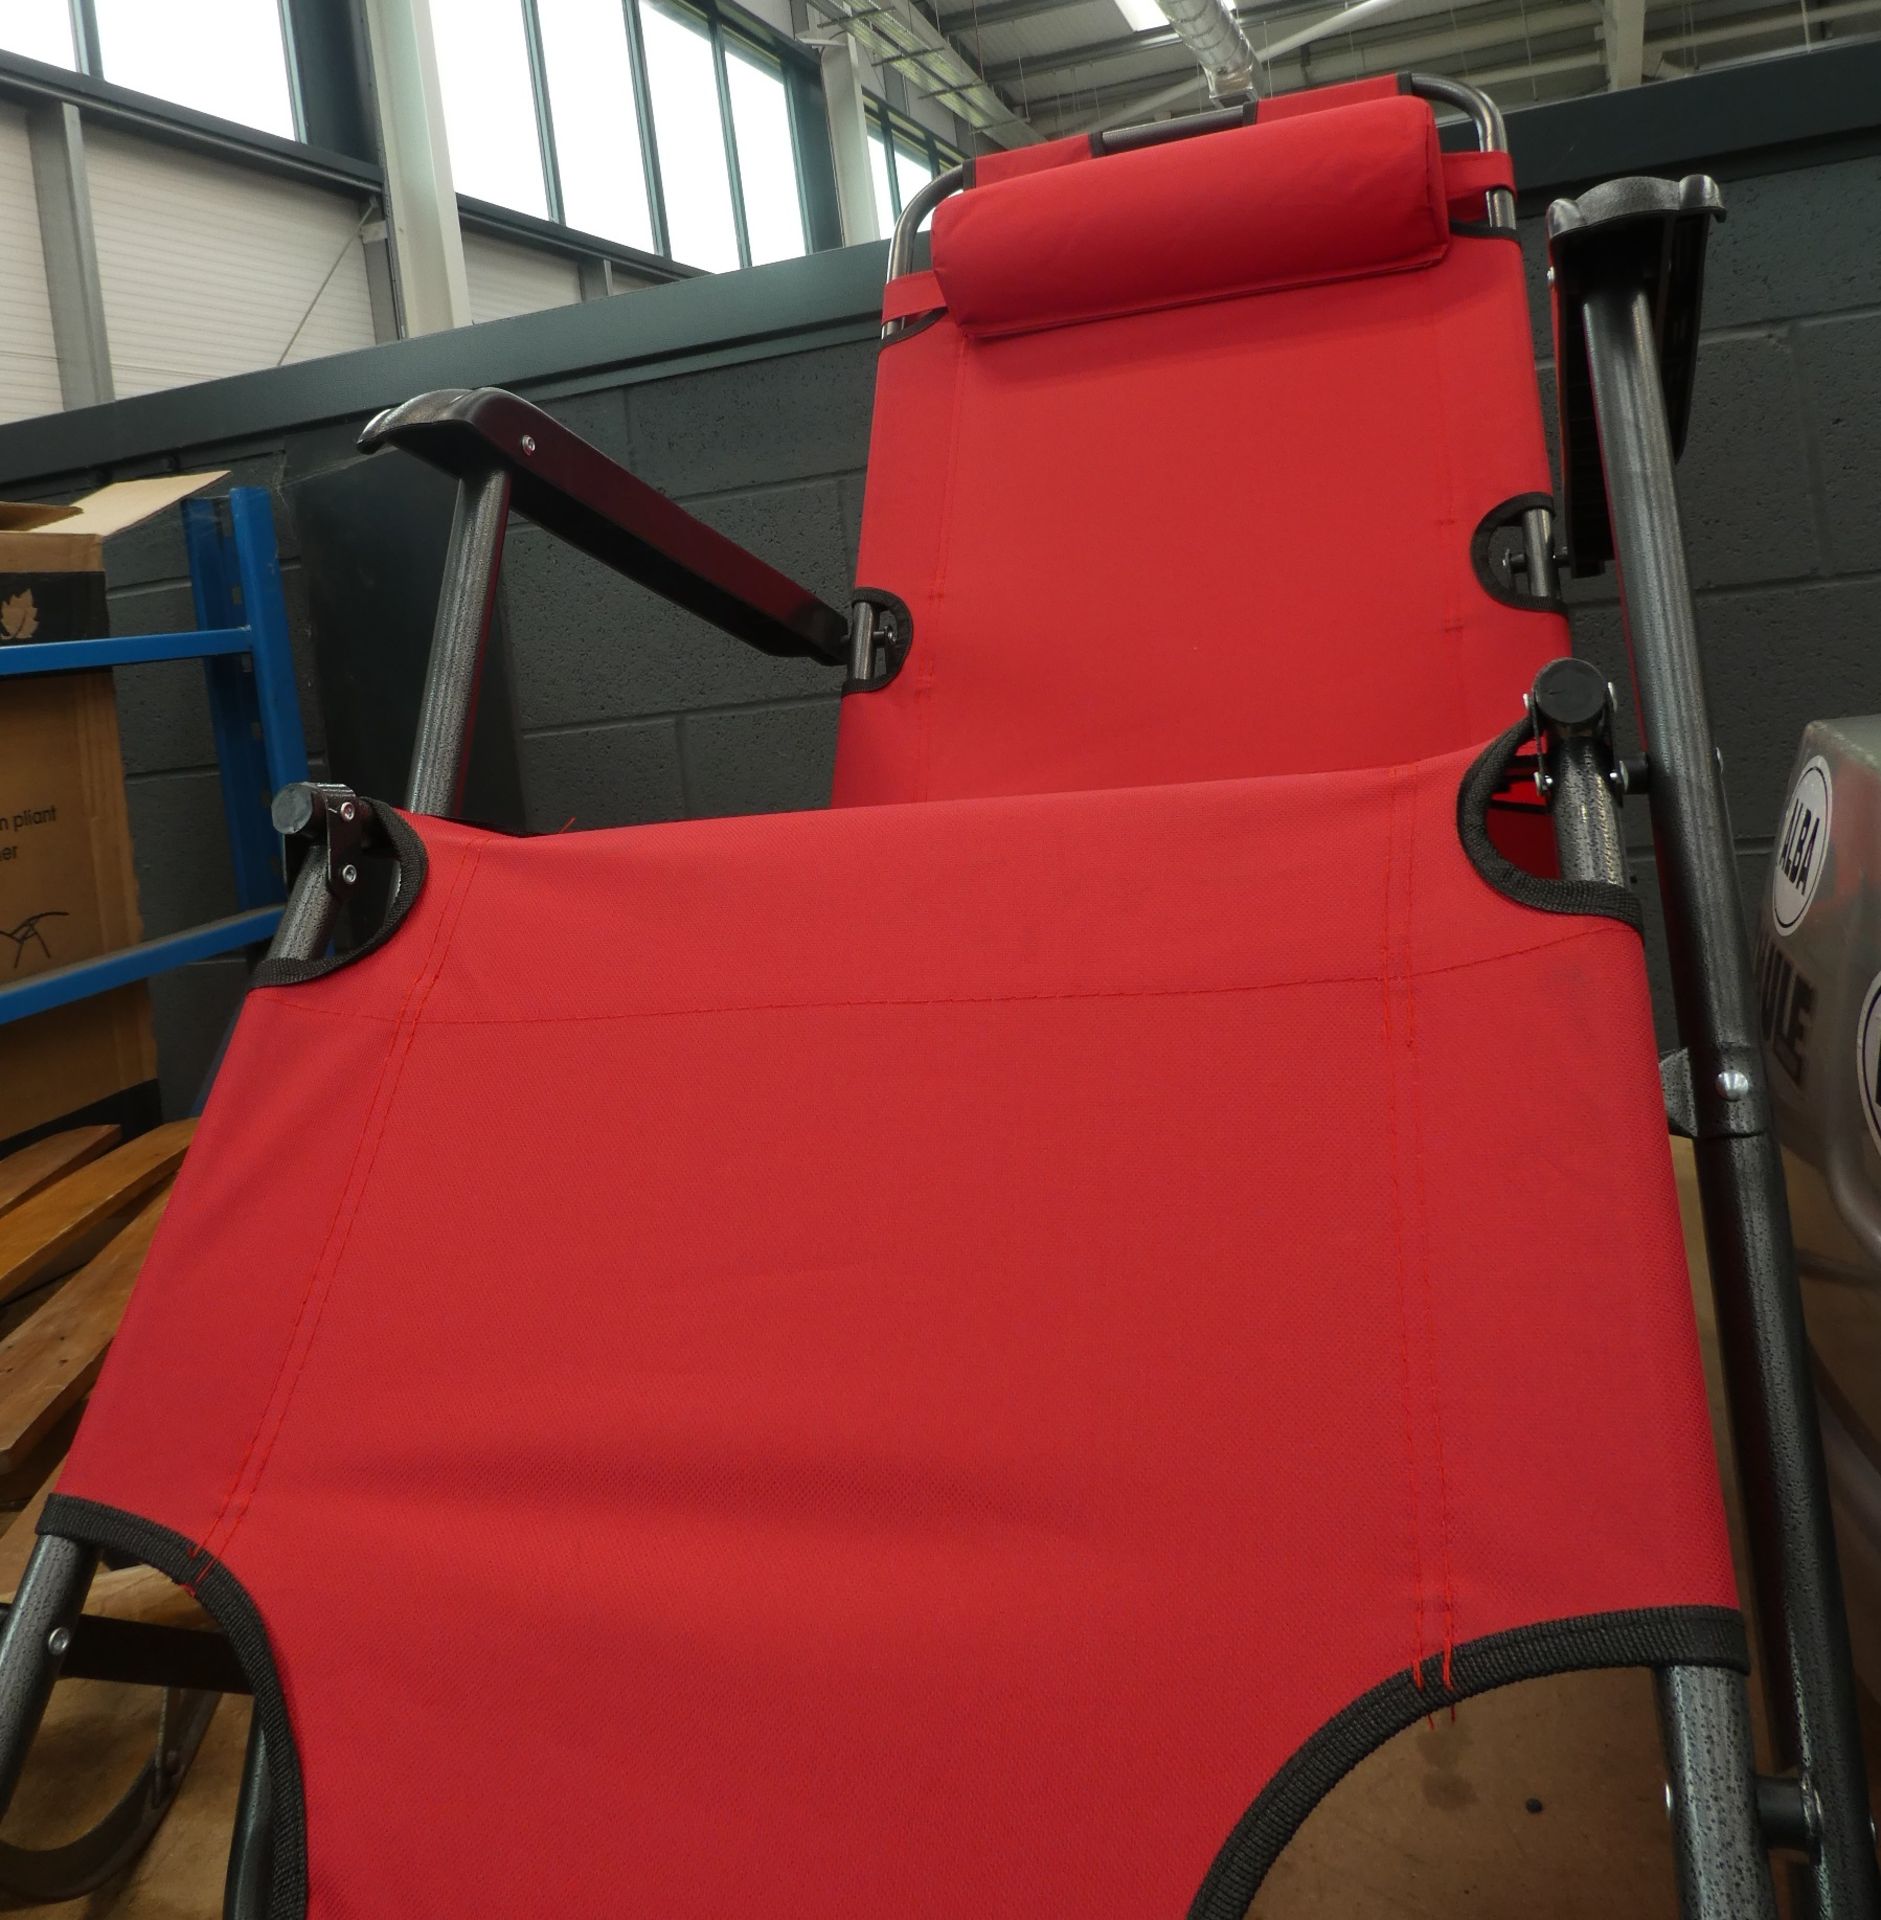 Red fold up chair - Image 2 of 2